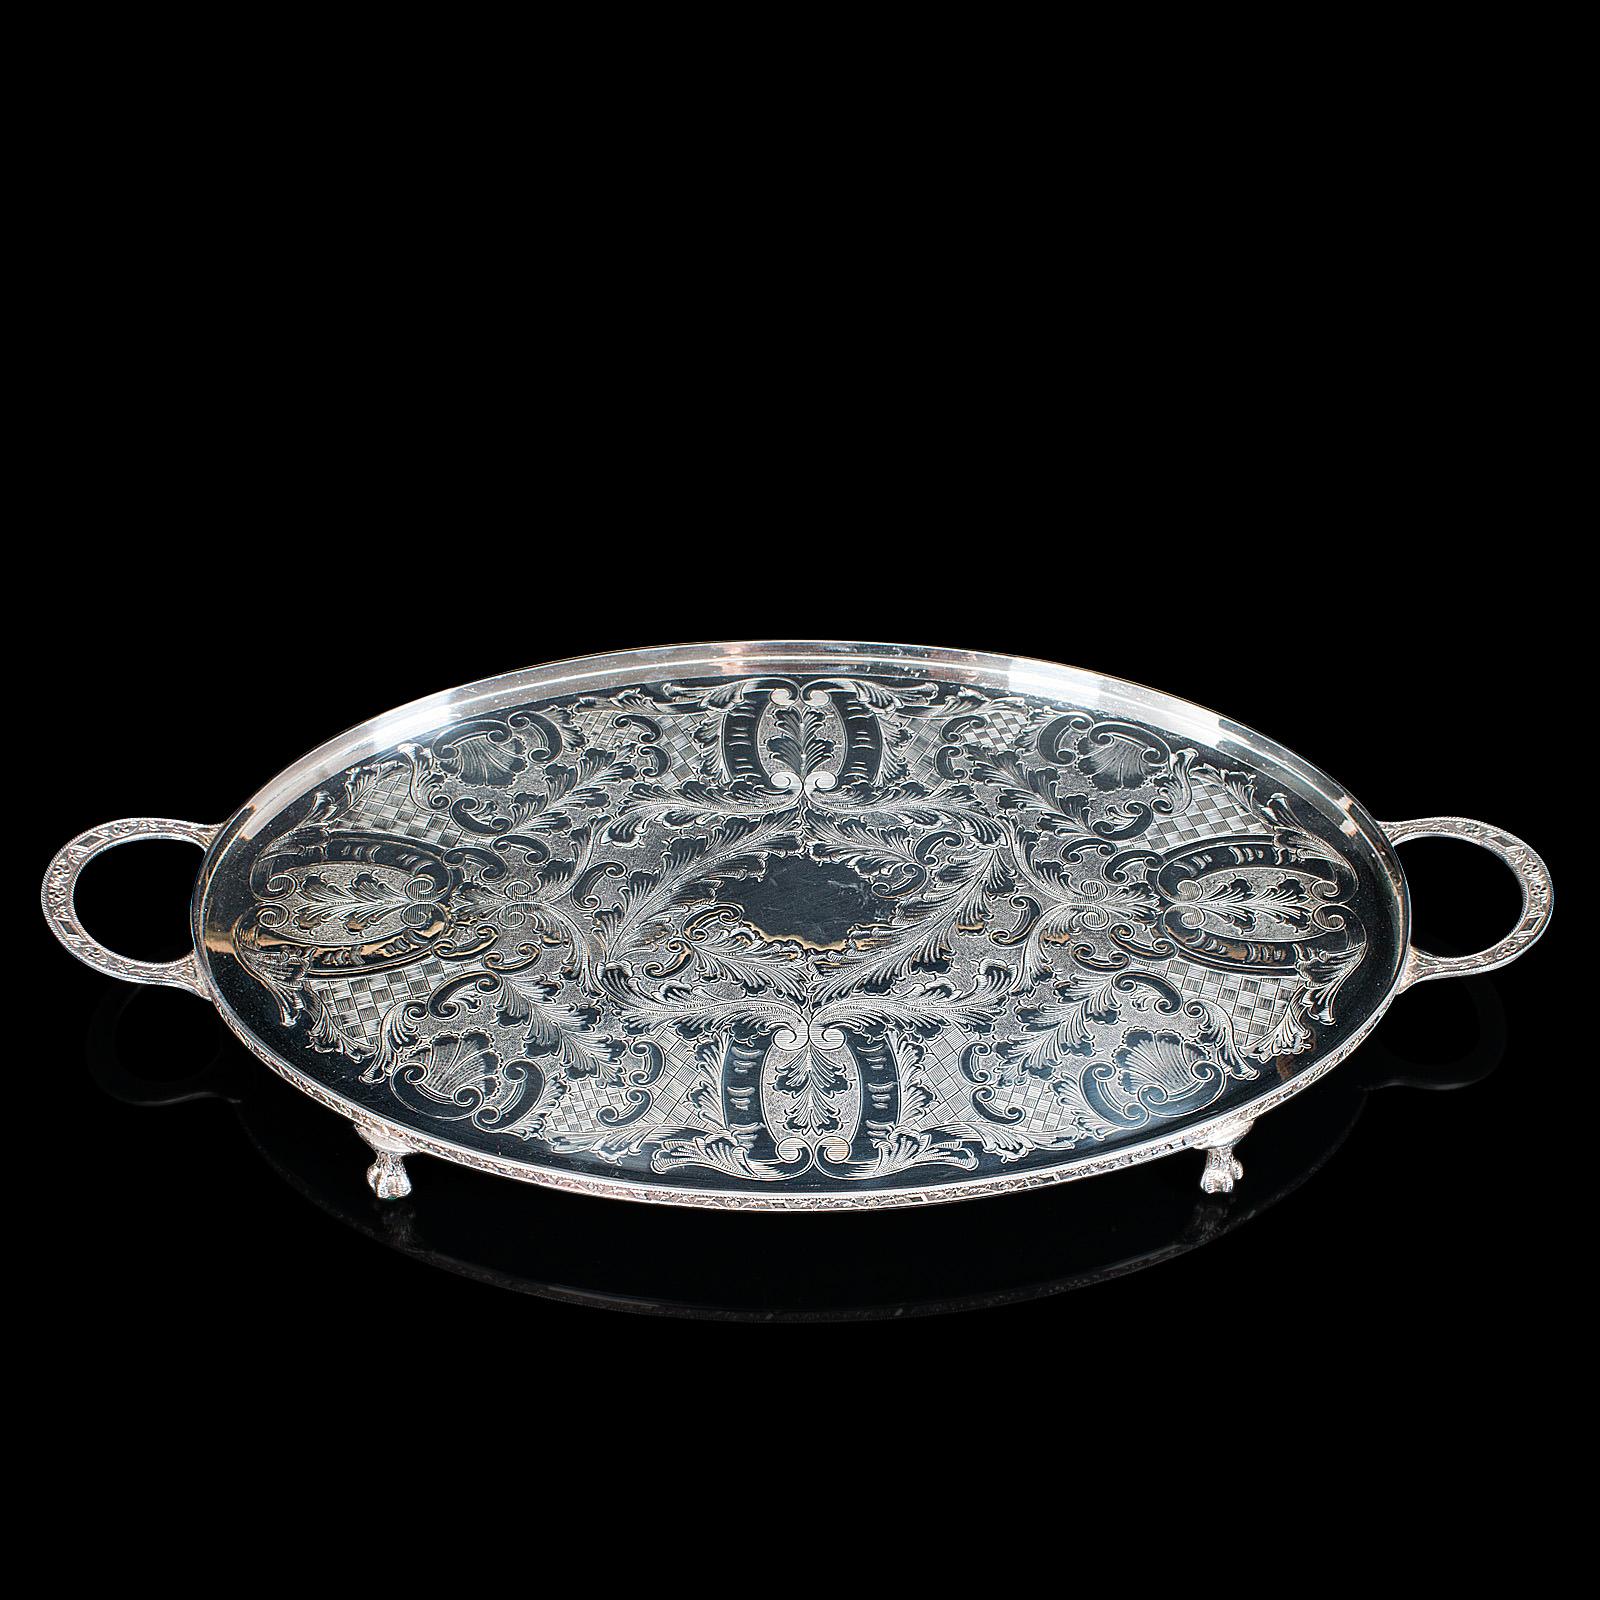 British Vintage Oval Serving Tray, English, Silver Plate, Afternoon Tea, Viners, C.1950 For Sale